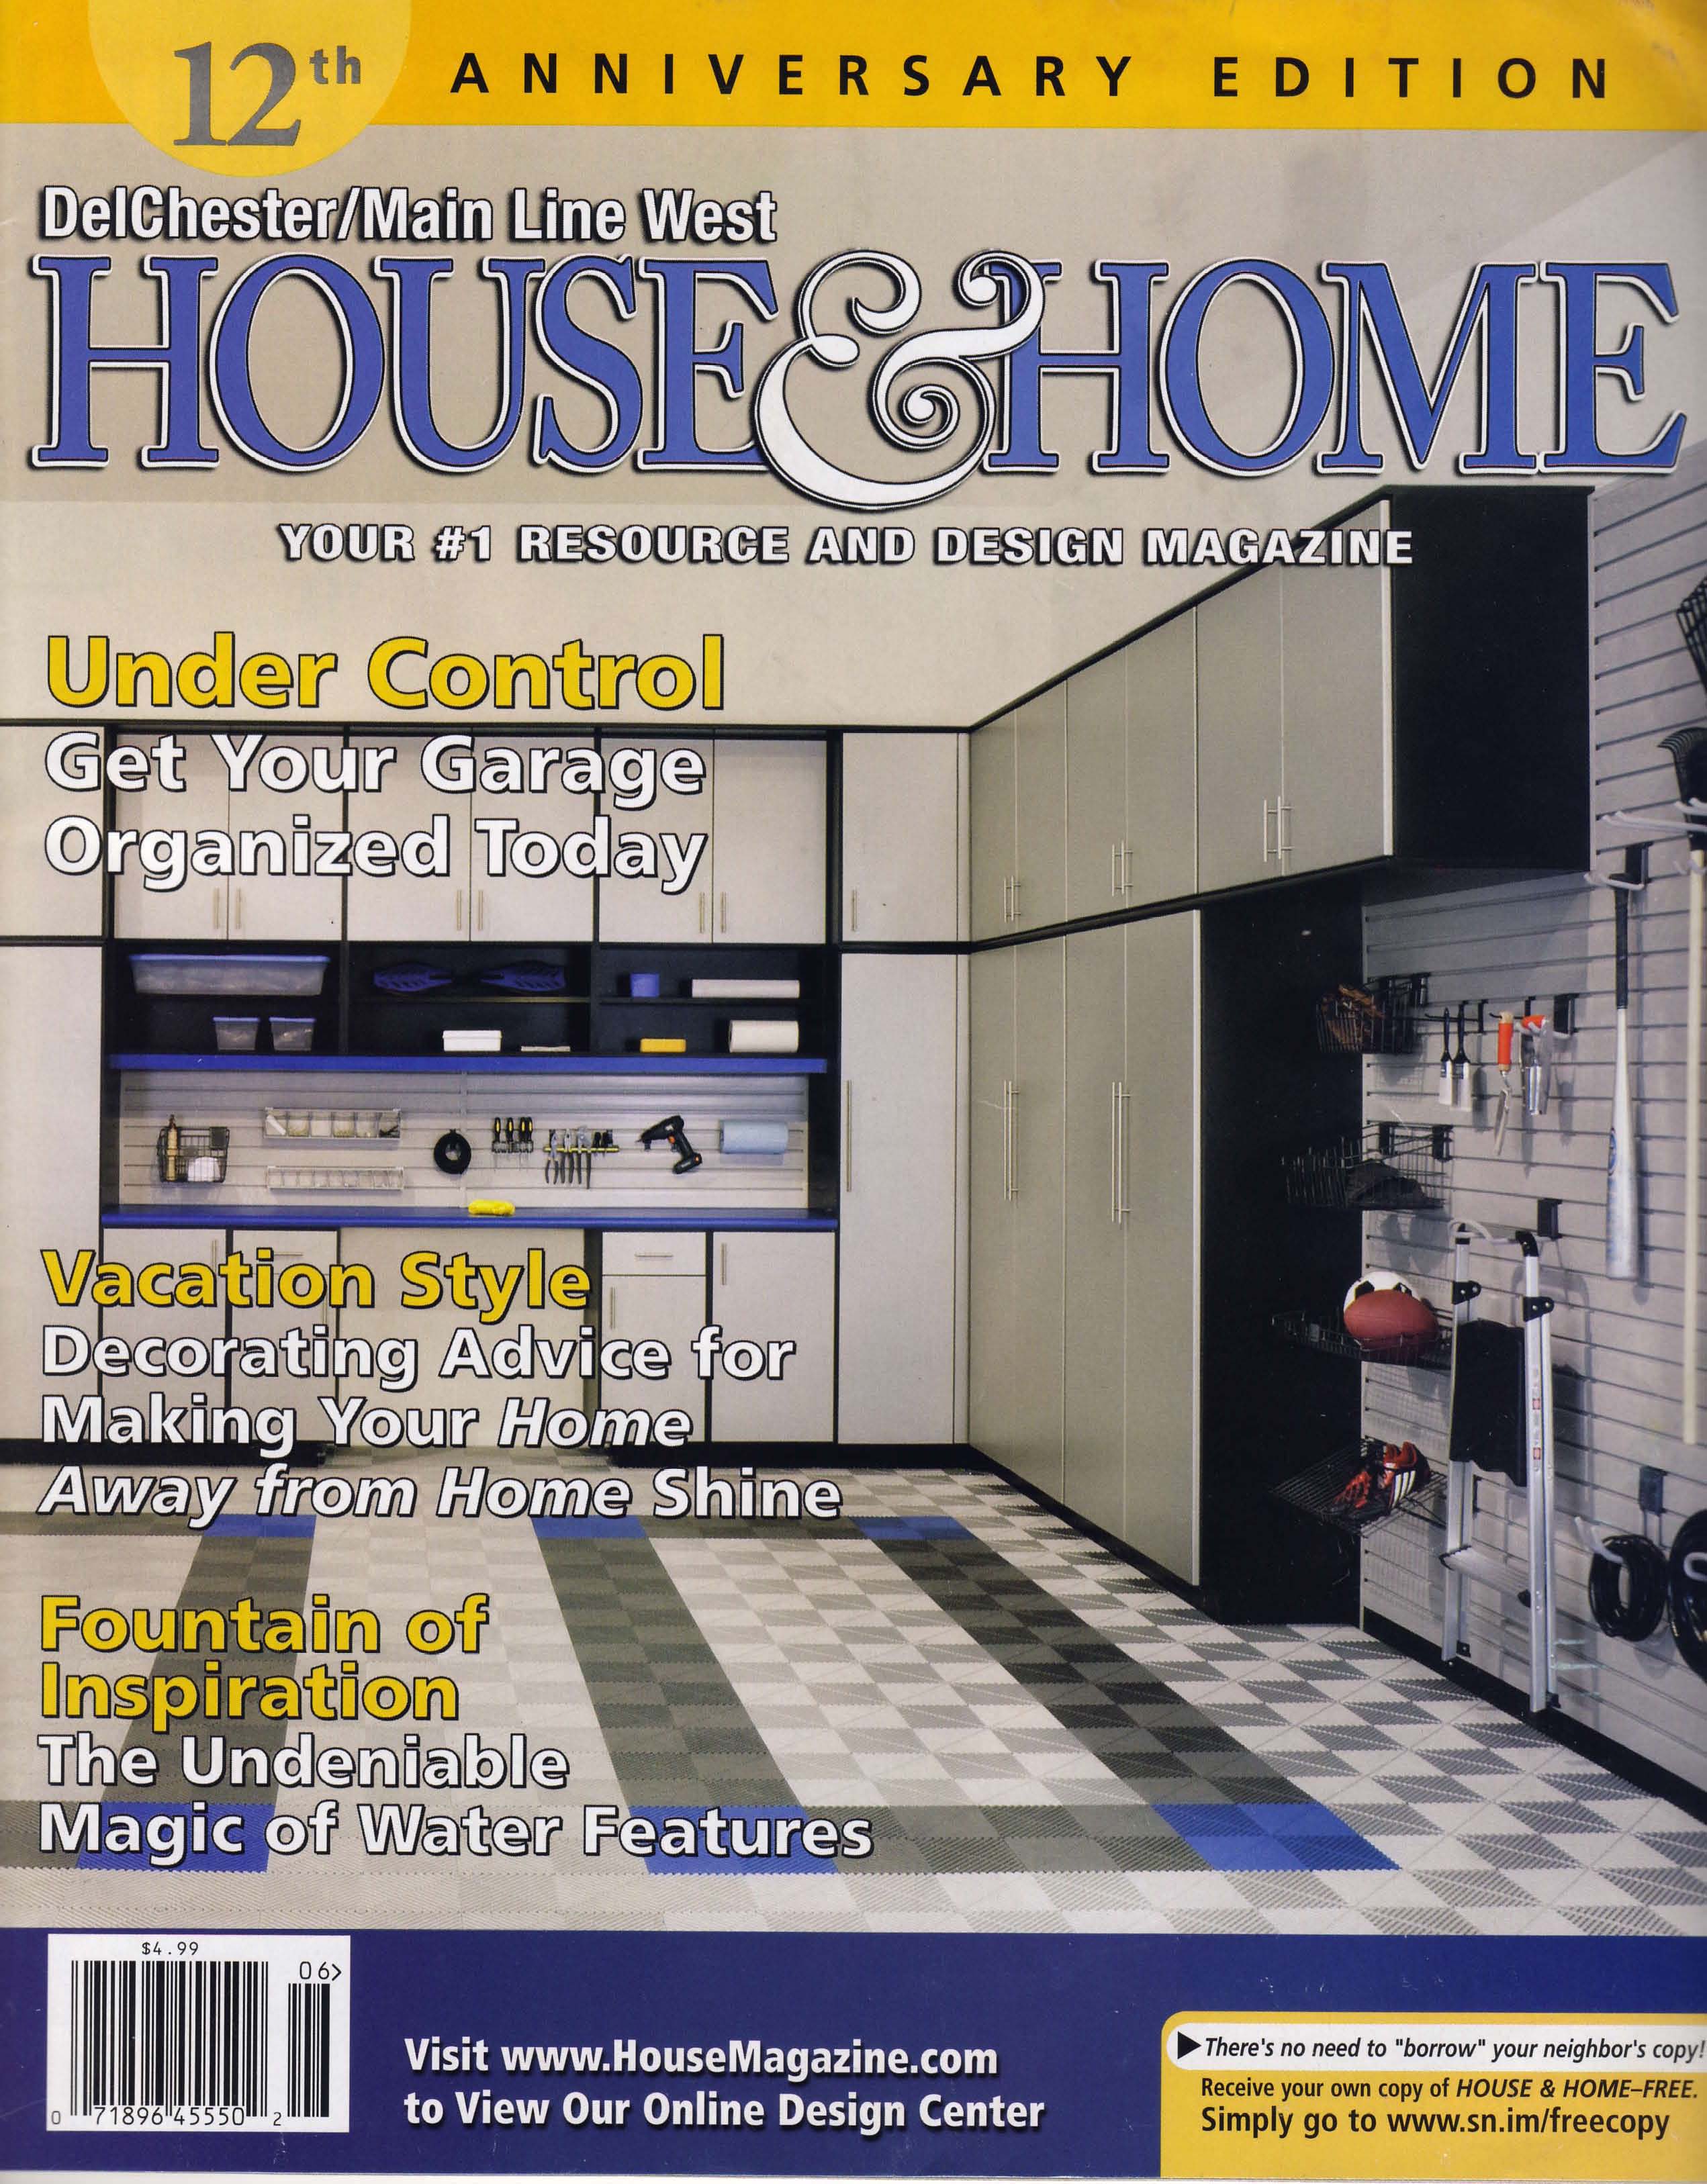 House & Home Decorating Advice 2011 anniversary edition cover